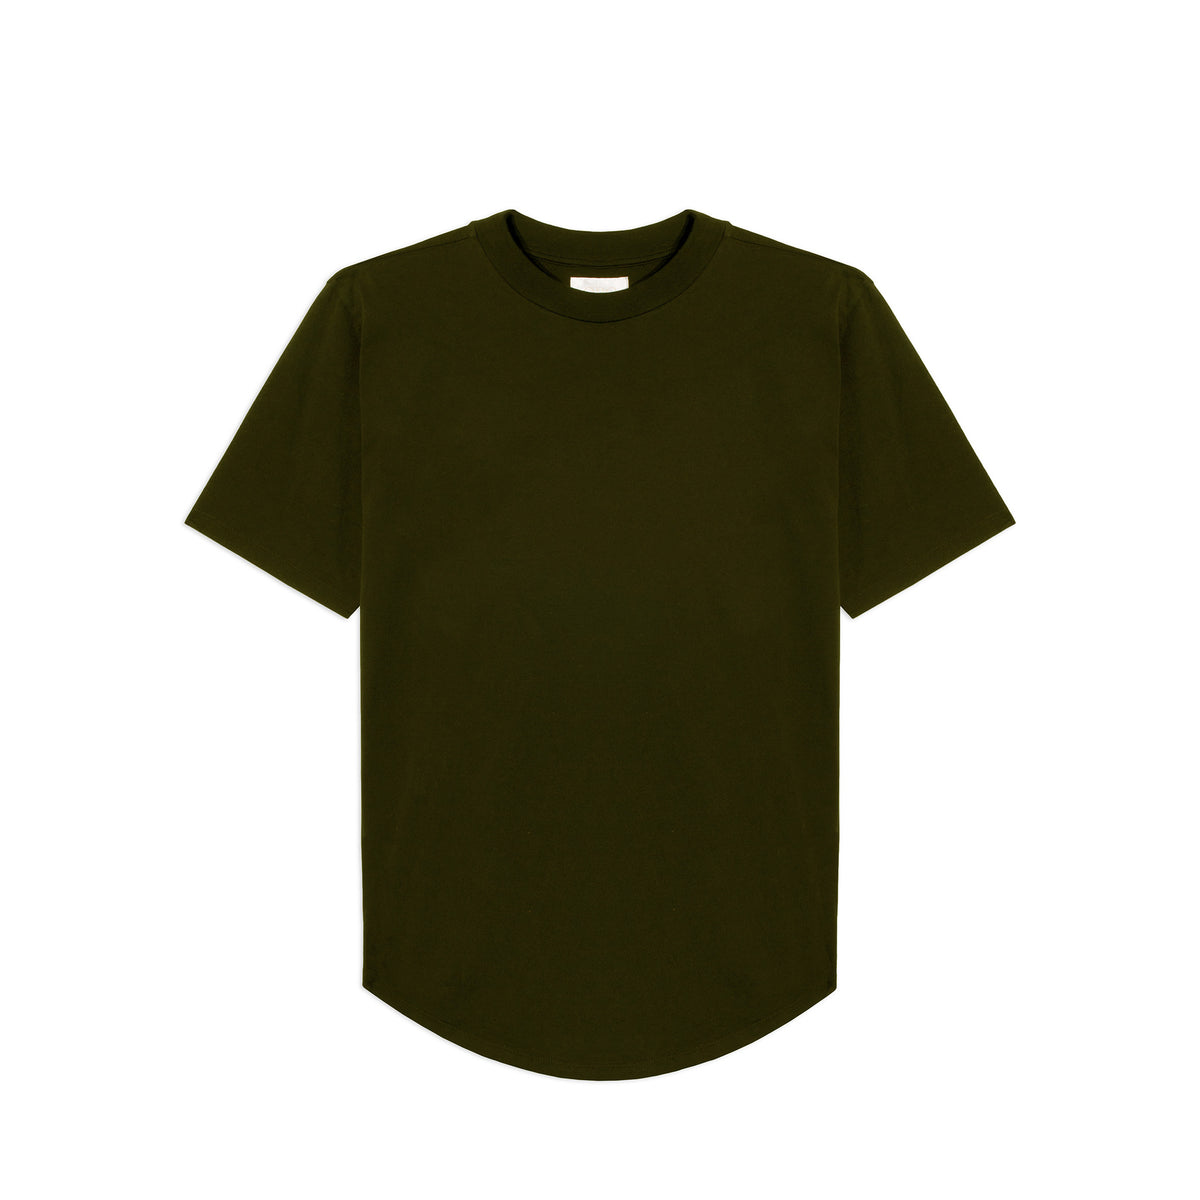 THE OLIVE SCALLOP TEE